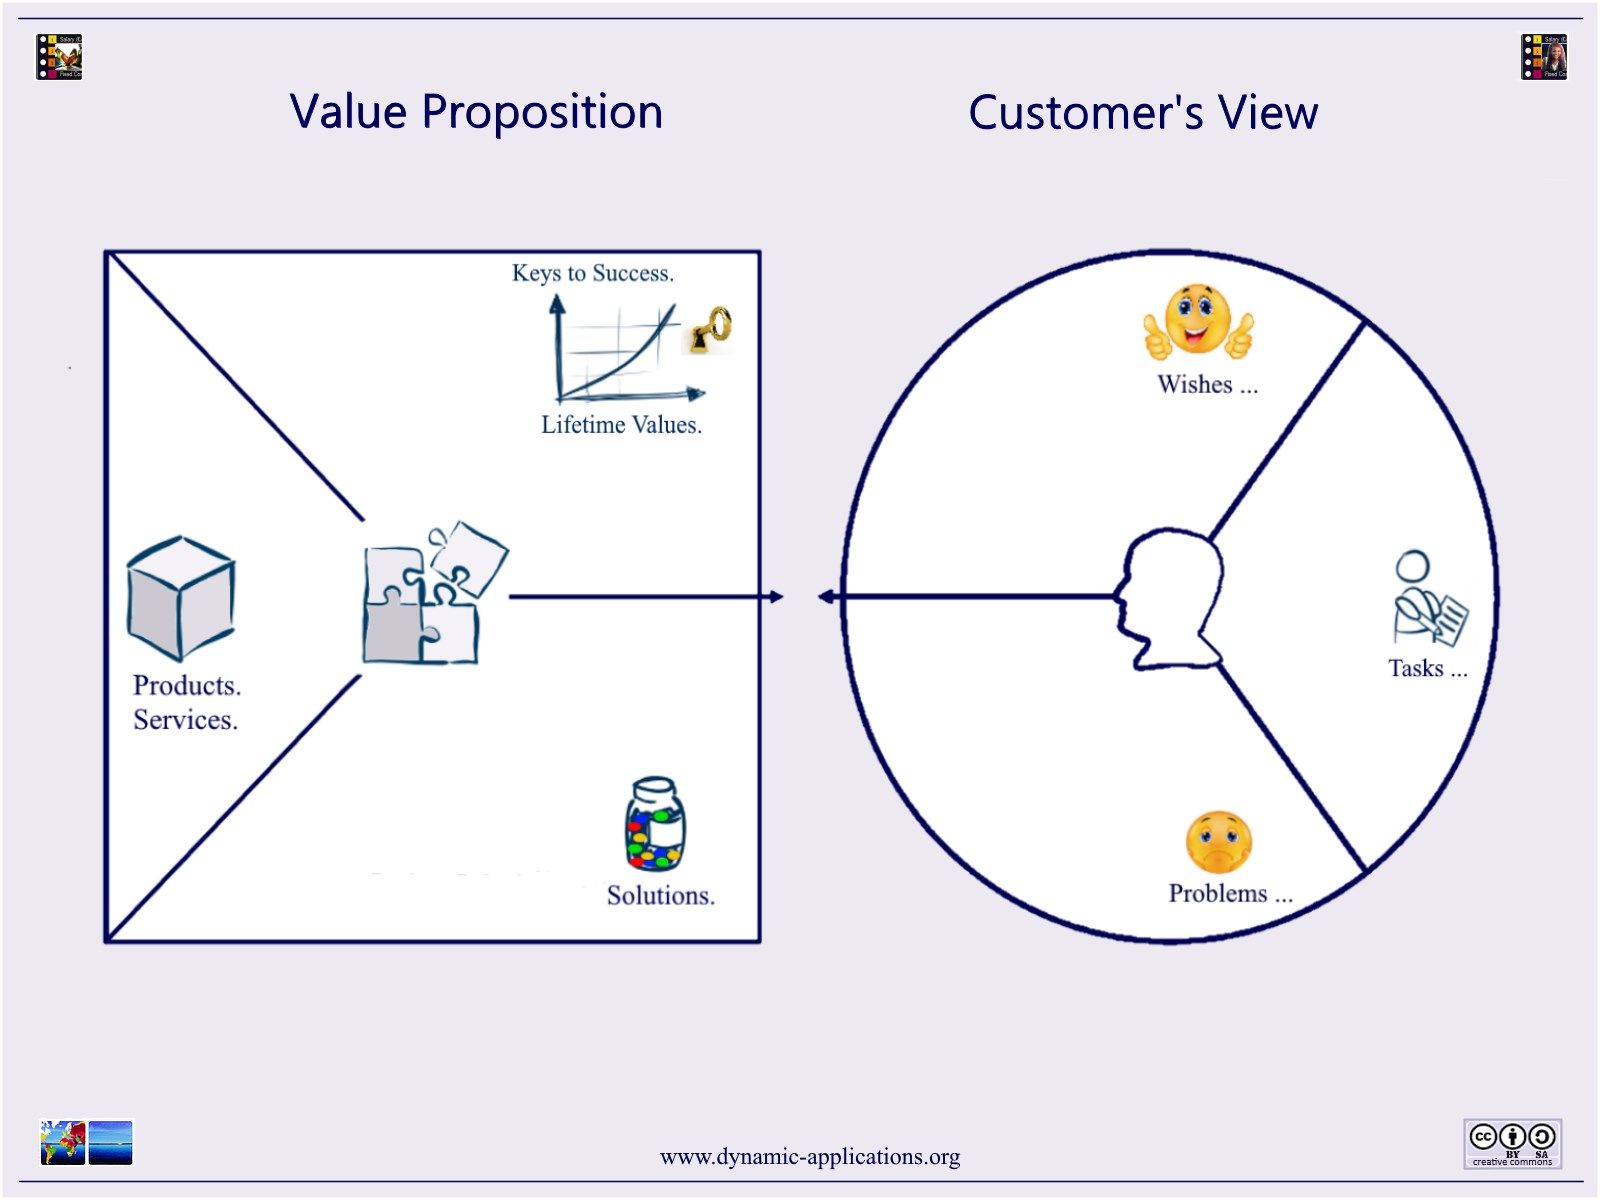 Value Proposition Canvas - determine the Value of your Work